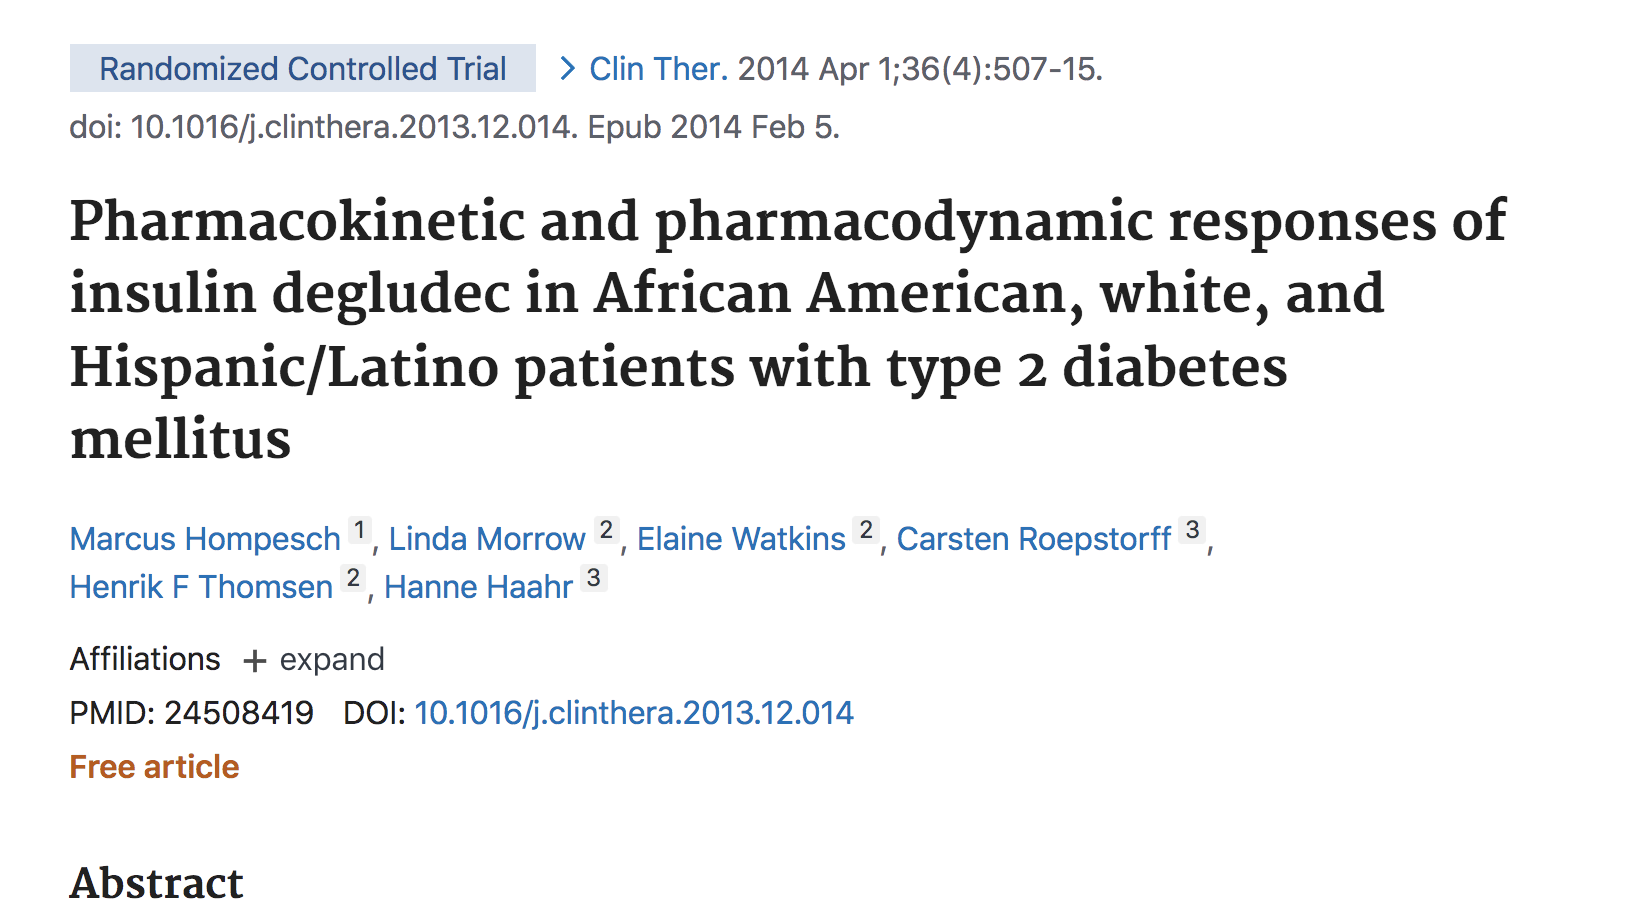 Pharmacokinetic and Pharmacodynamic Responses of Insulin Degludec in African American, White, and Hispanic/Latino Patients With Type 2 Diabetes Mellitus thumbnail